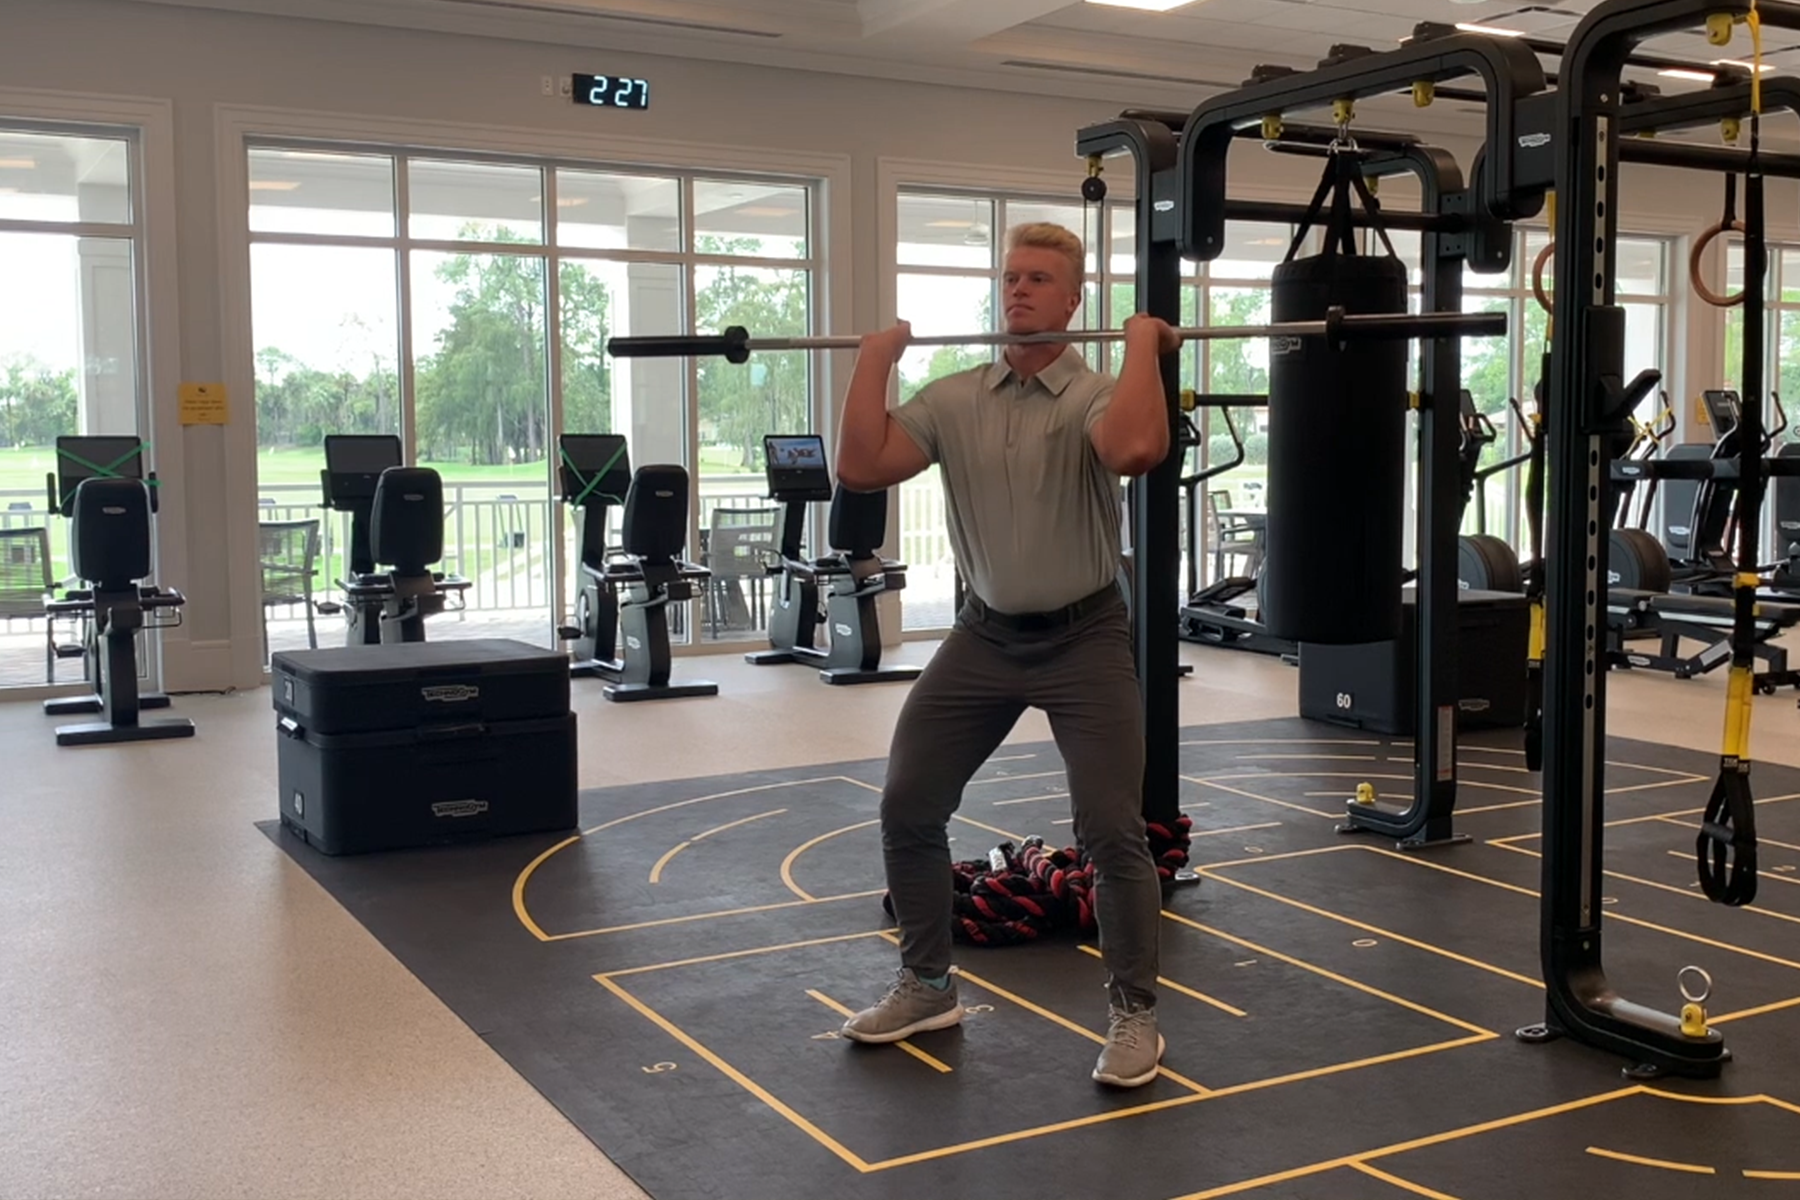 4 sandbag exercises to add power to your golf swing